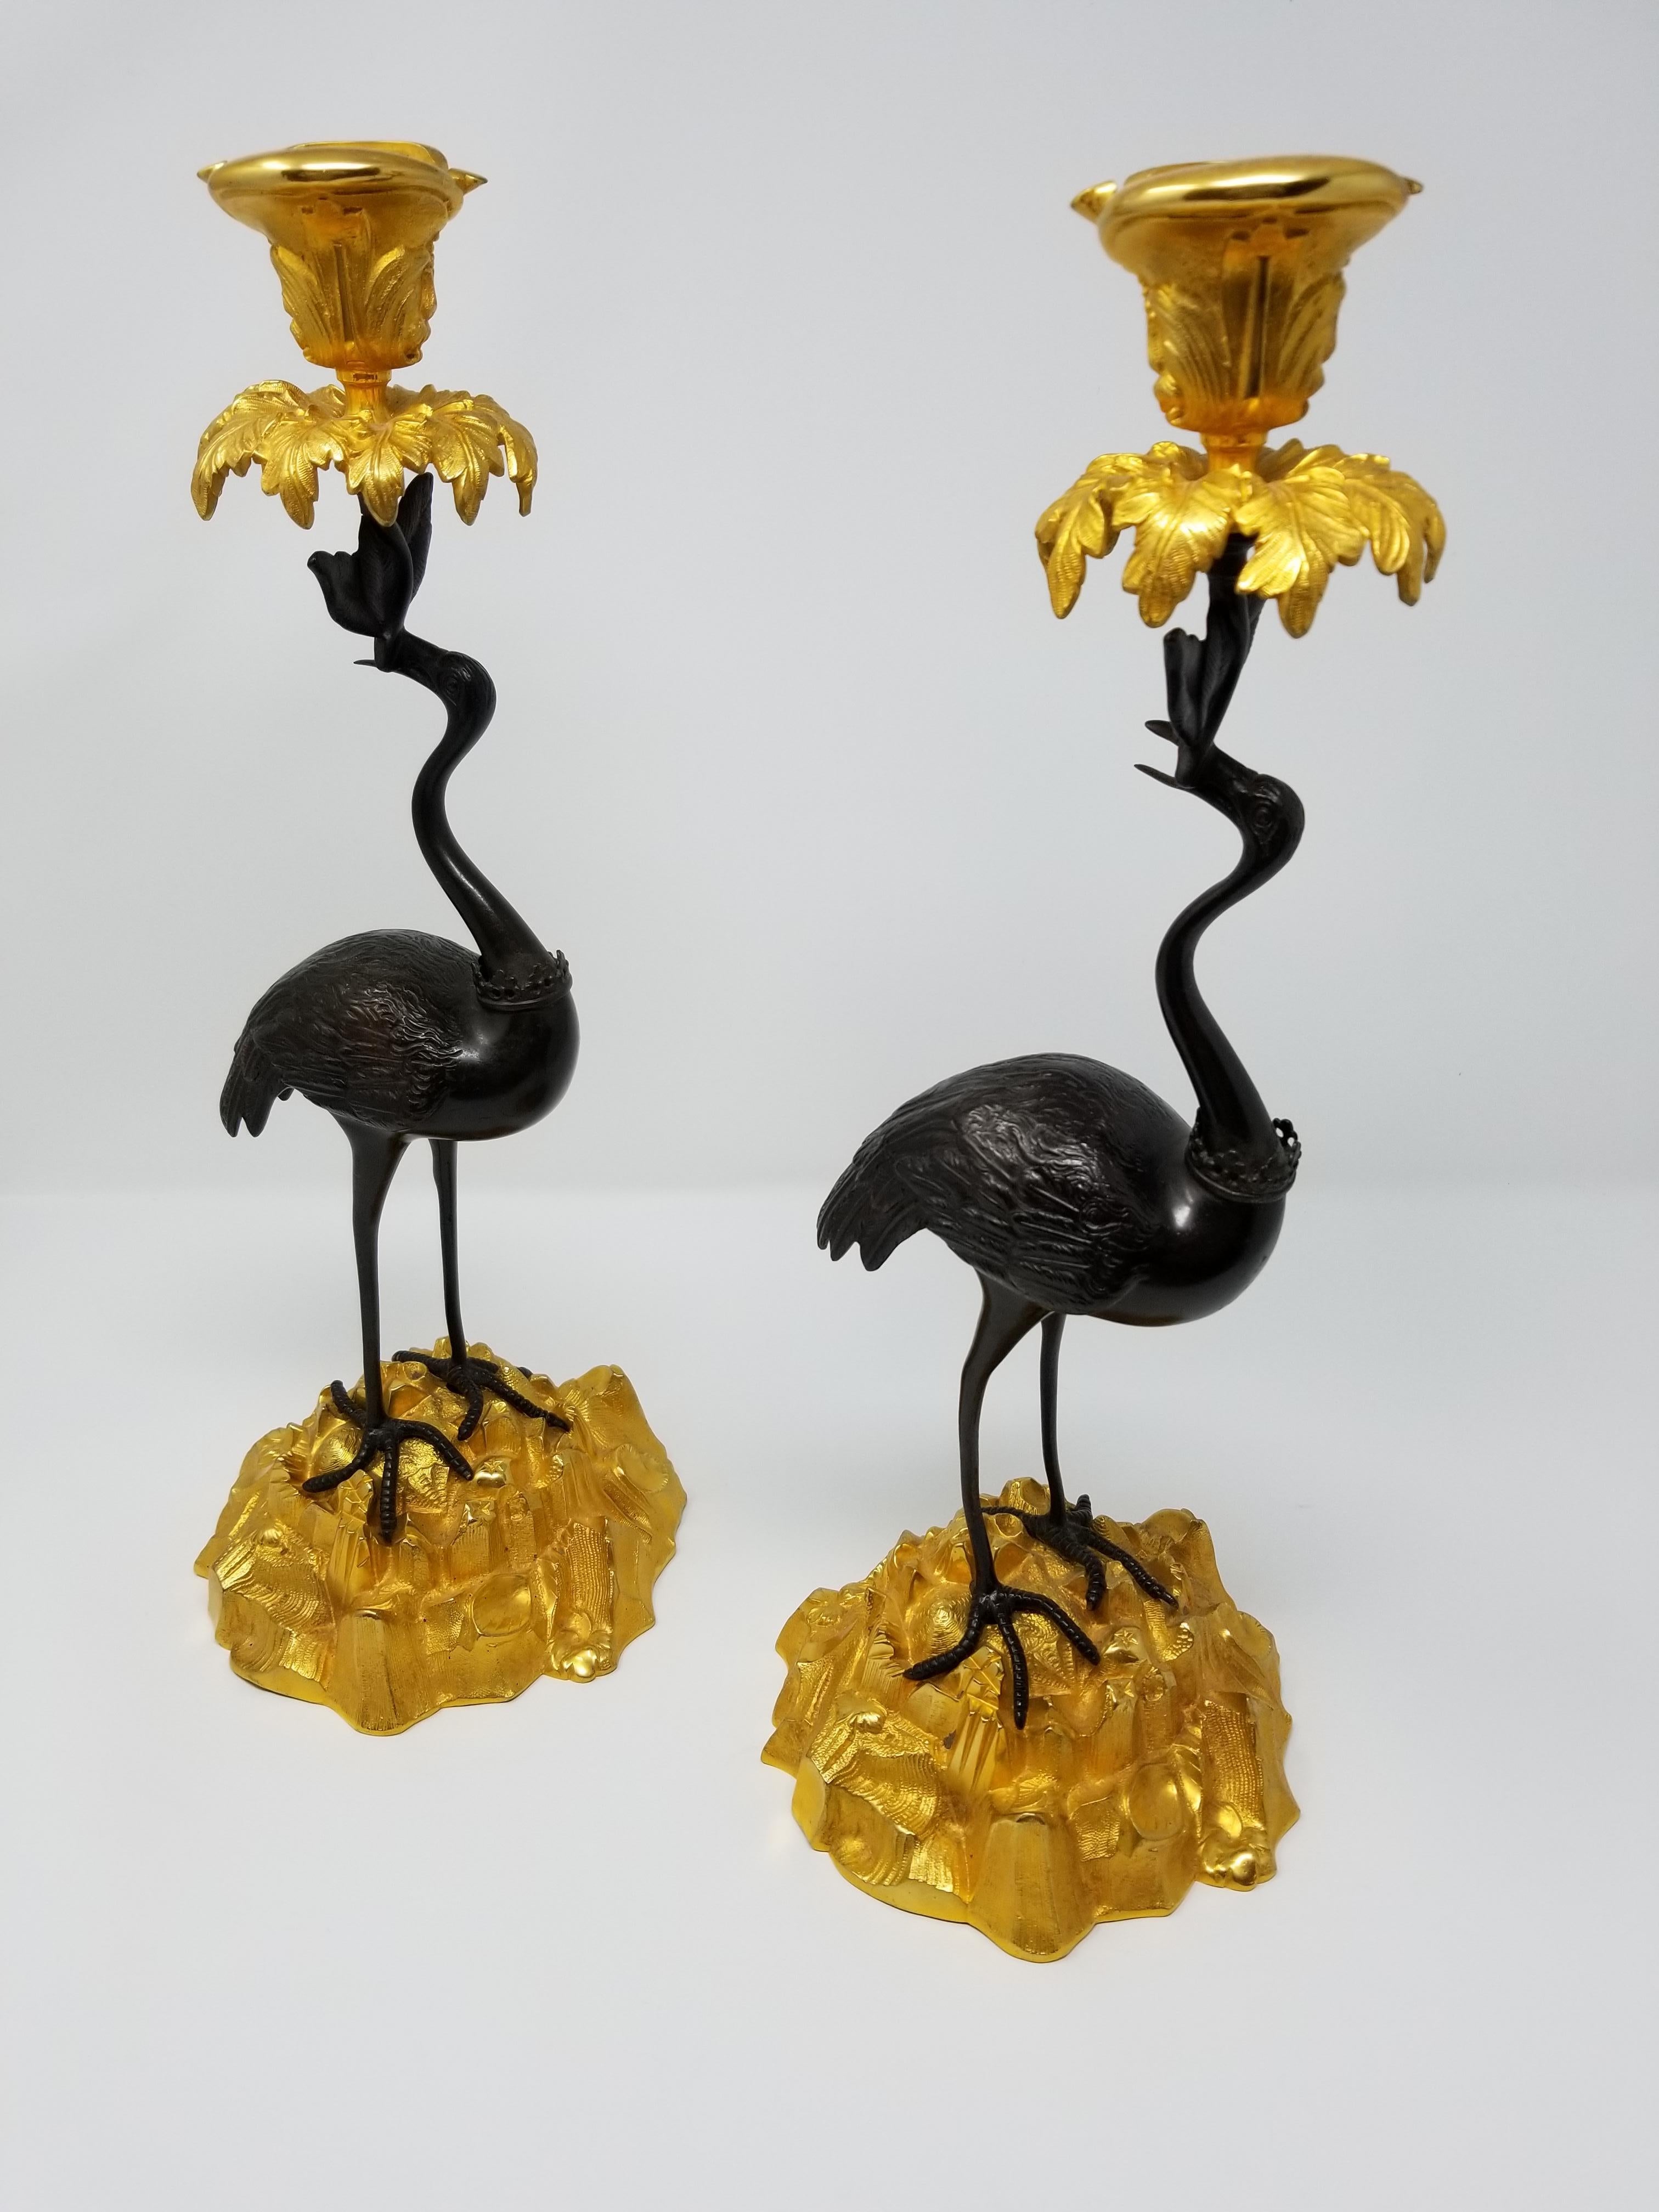 A beautiful pair of French chinoiserie patinated and gilt bronze standing crane-form candlesticks. Each crane is beautifully hand-chiseled with exceptional detail from the feet to the feathers and head. The cranes are seen standing on a beautifully